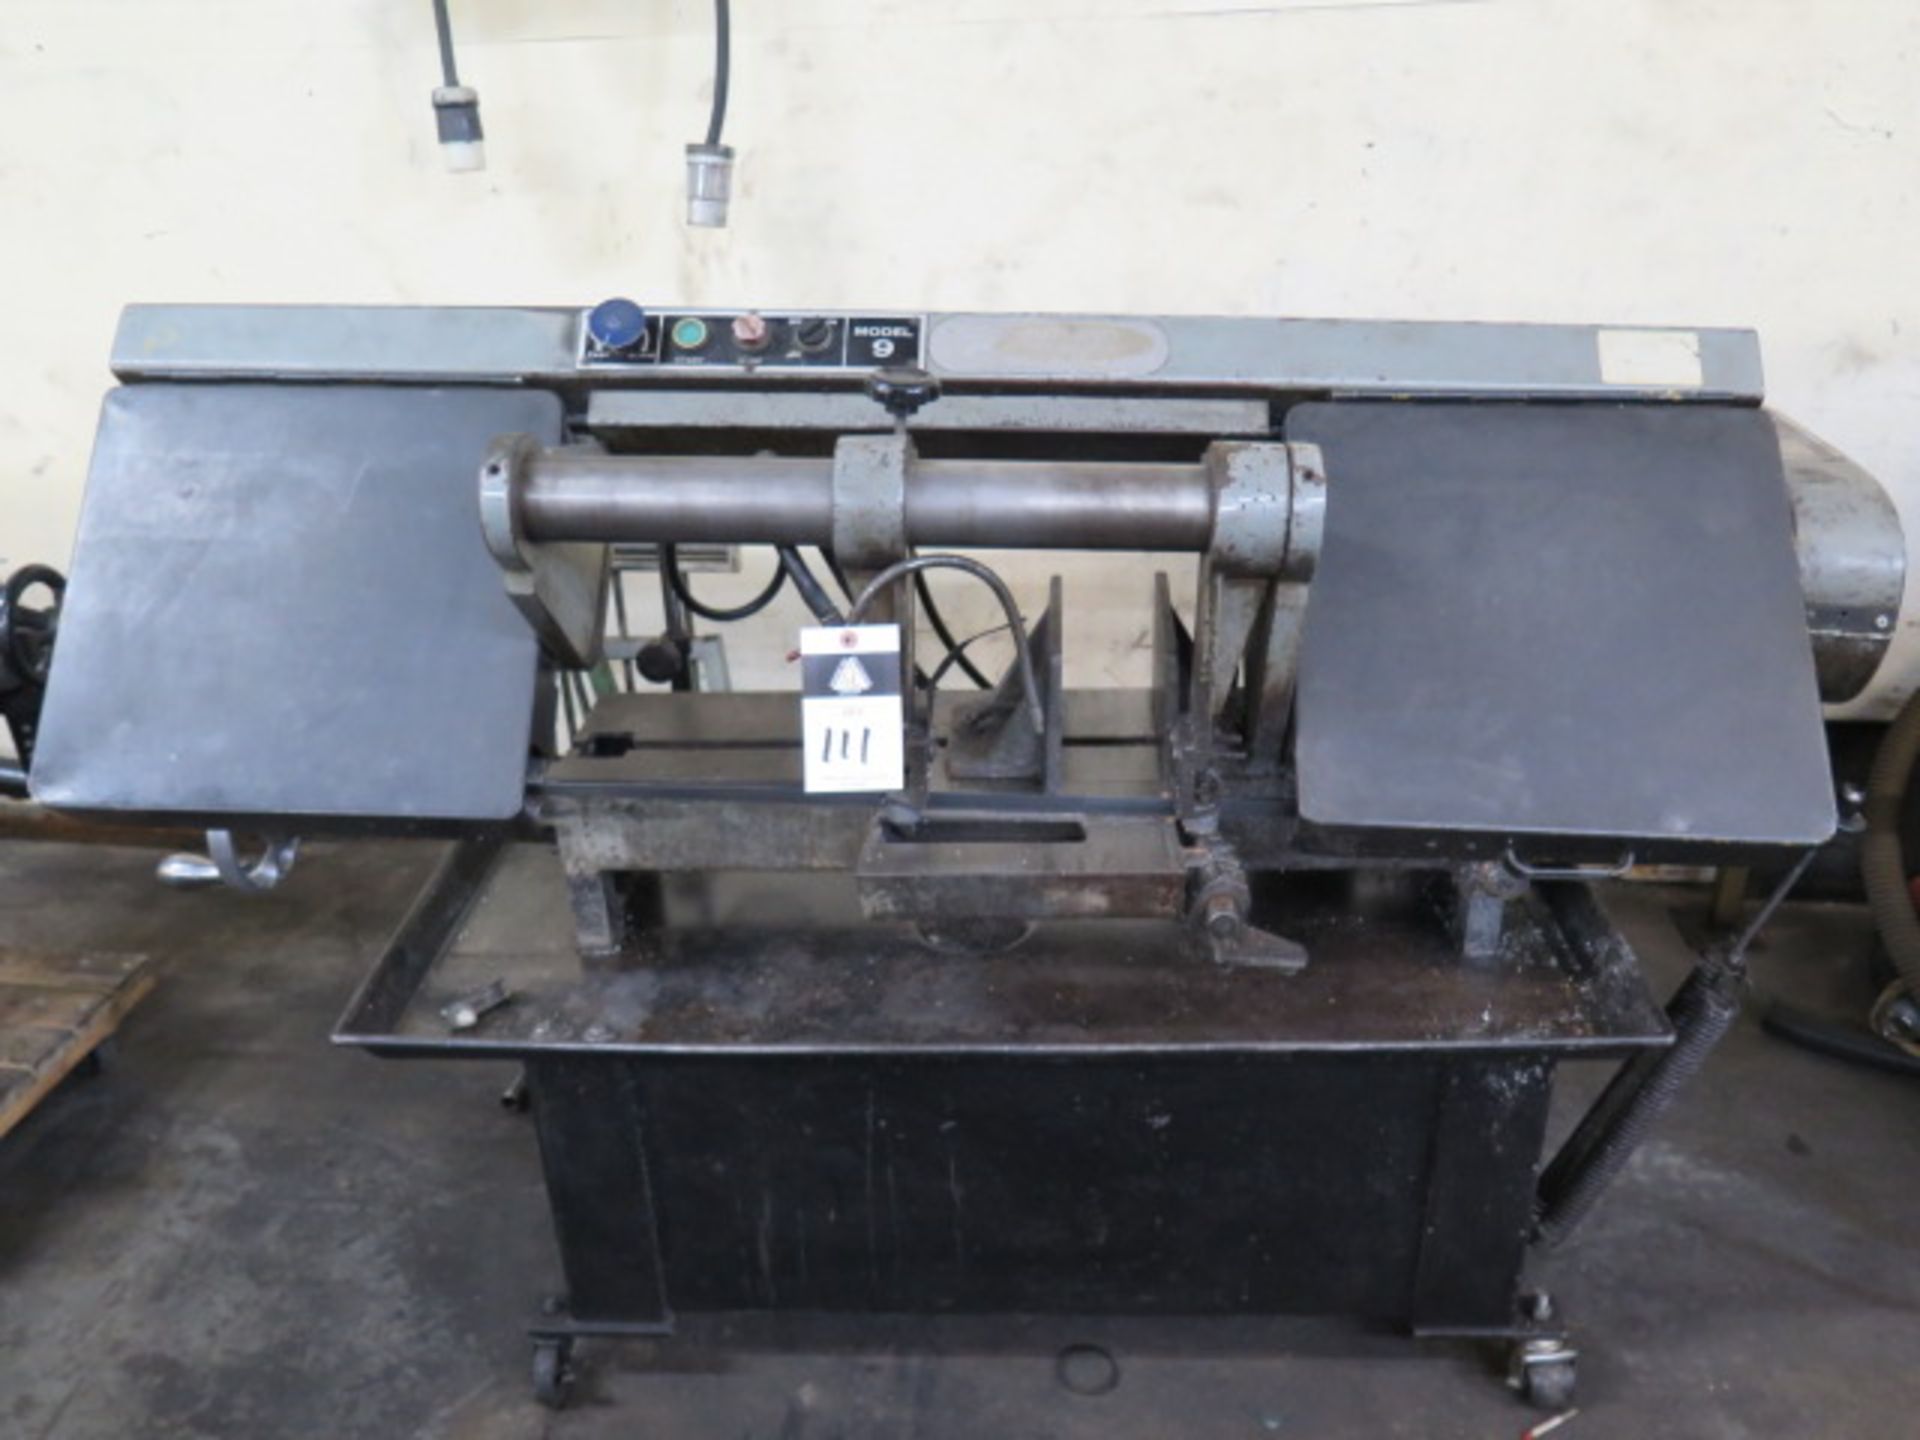 Rutland mdl. 9 9” Horizontal Band Saw w/ Manual Clamping, Work Stop, Rolling Base (SOLD AS-IS - NO